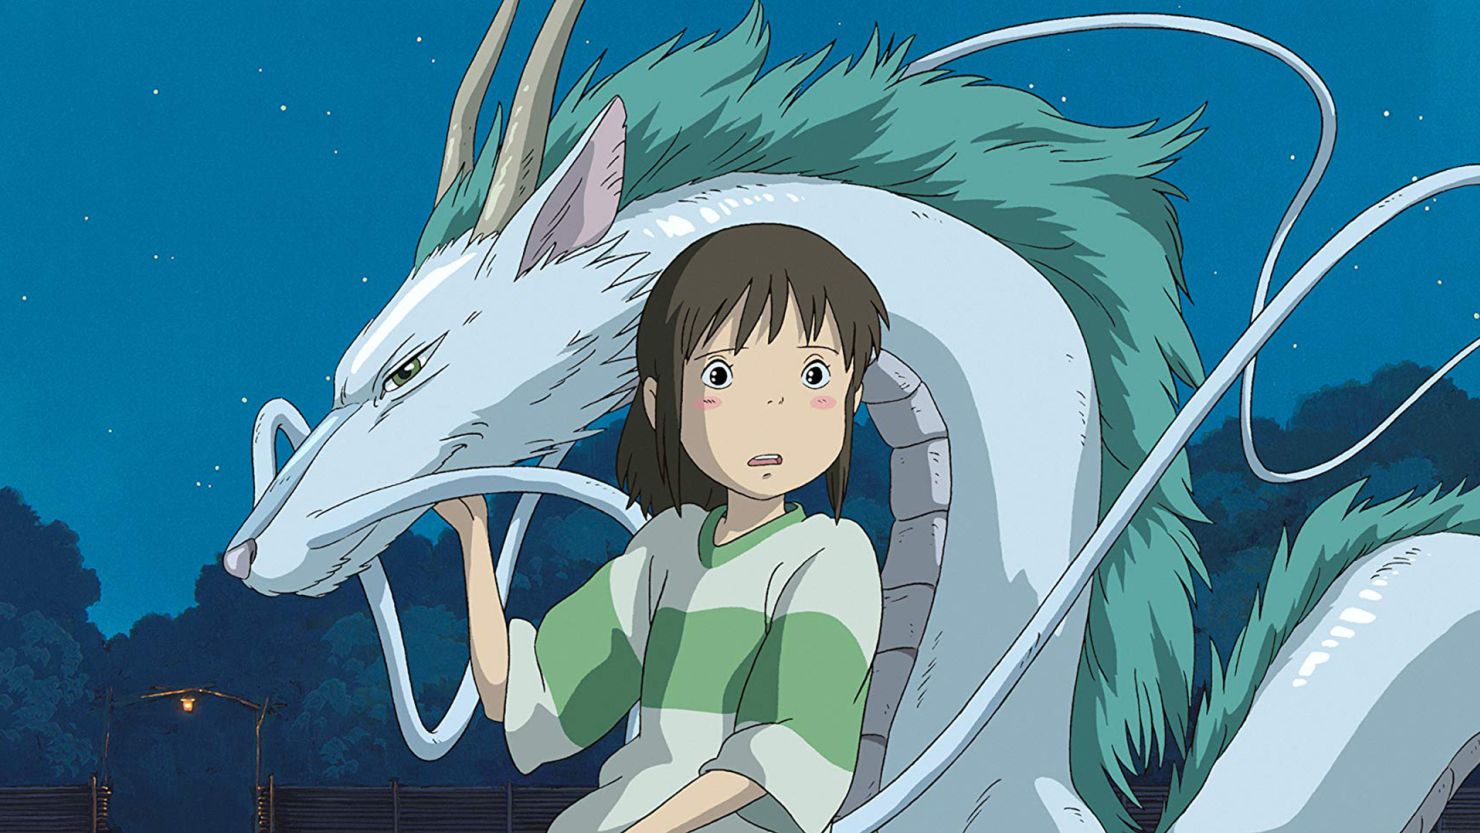 Studio Ghibli sold to Nippon TV after finding no successors for